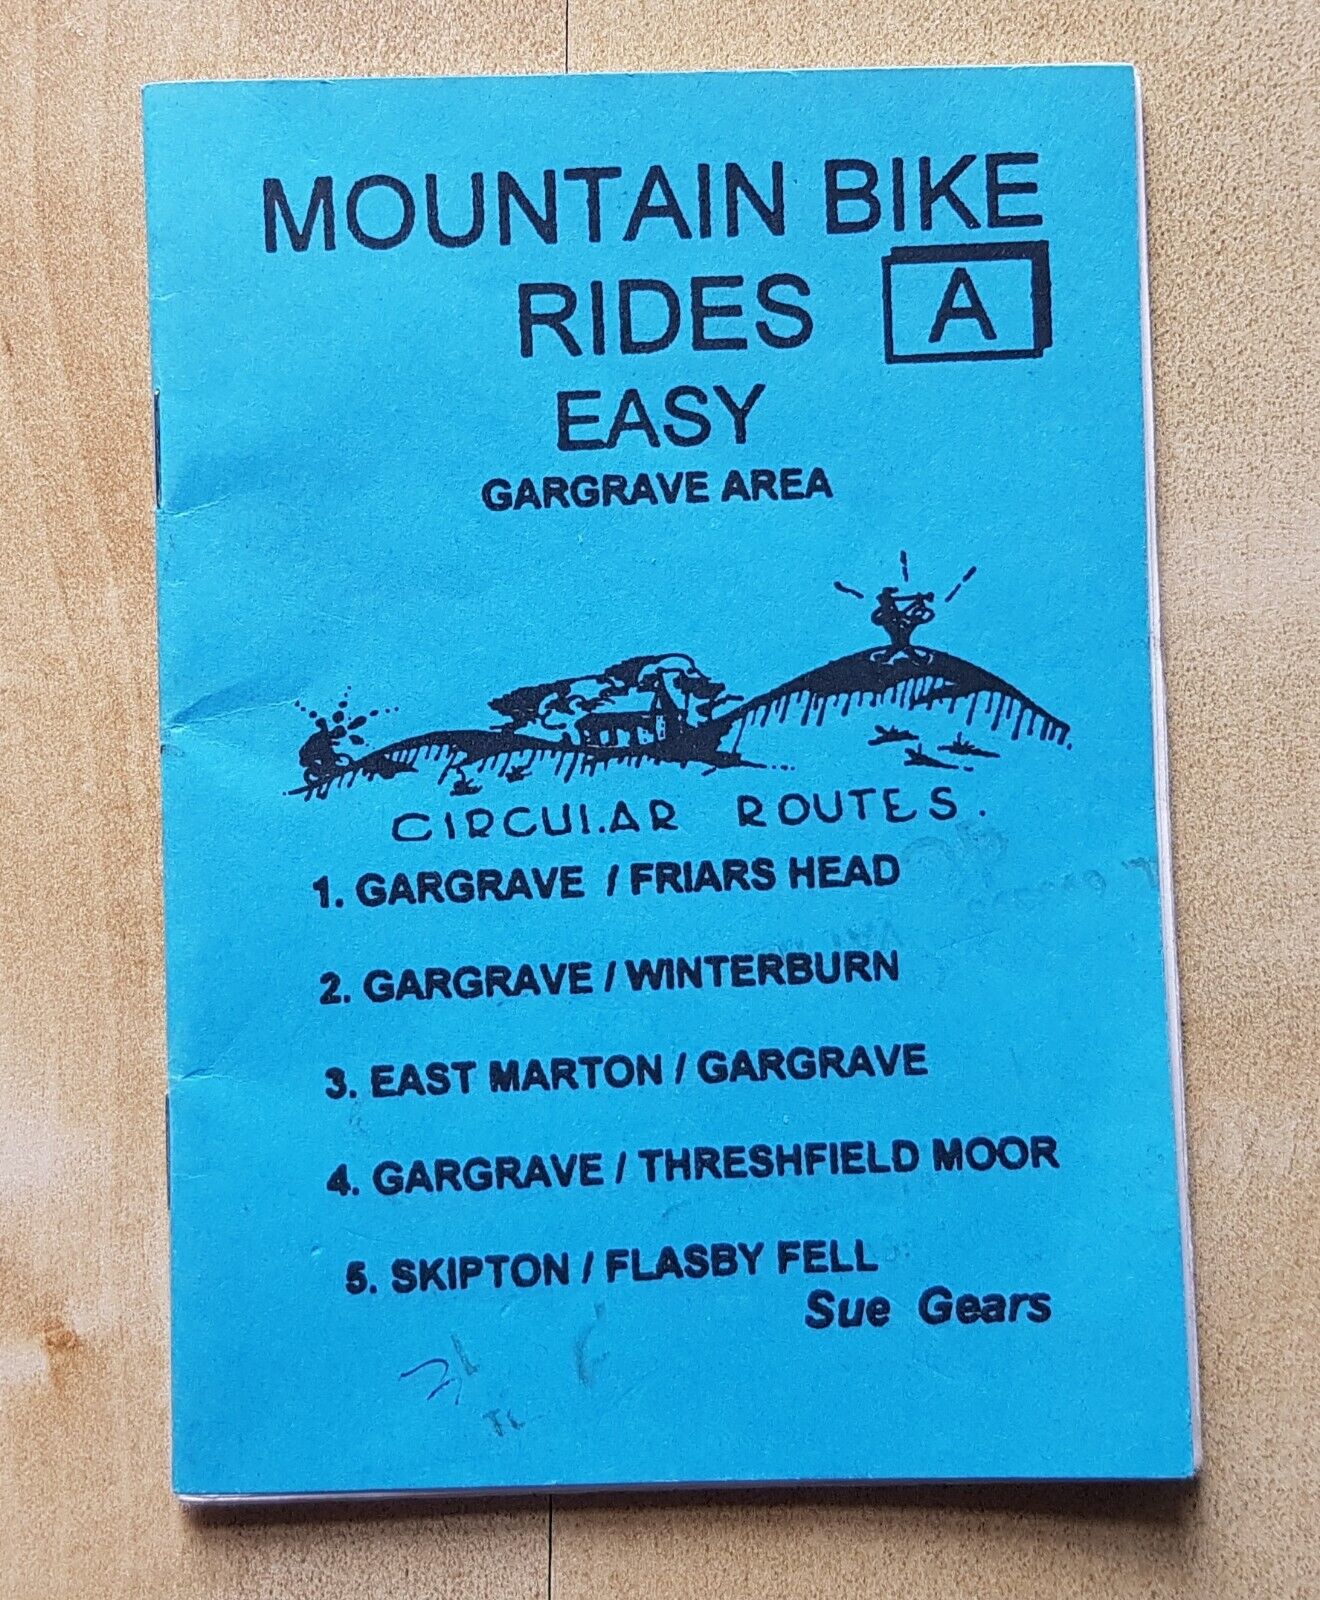 Mountain Bike Rides Easy Gargrave Area by Sue Gears